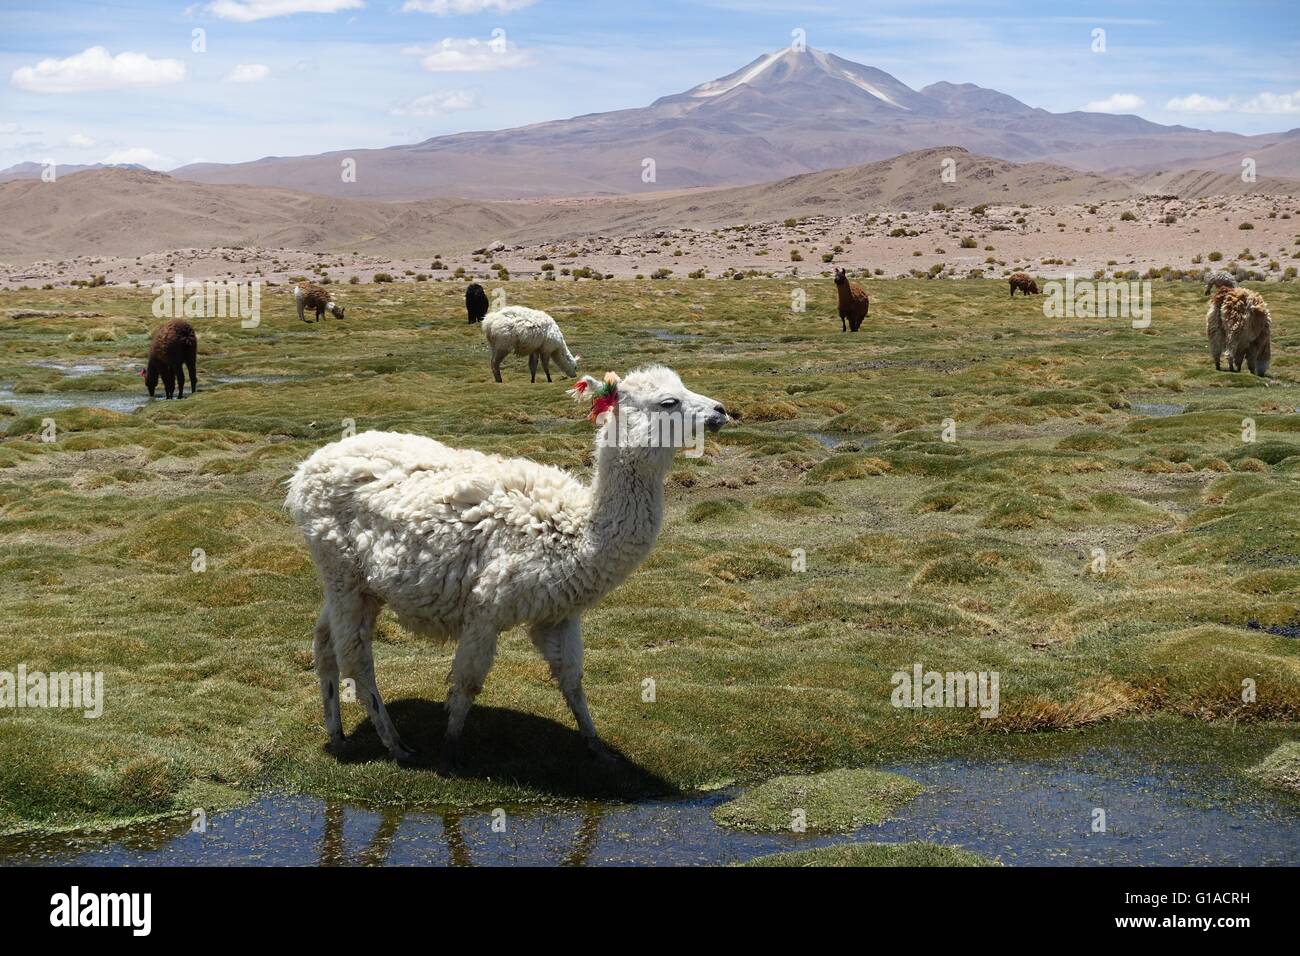 Llamas and Alpaca's grazing in the high altitude grasslands of the Andes. Stock Photo